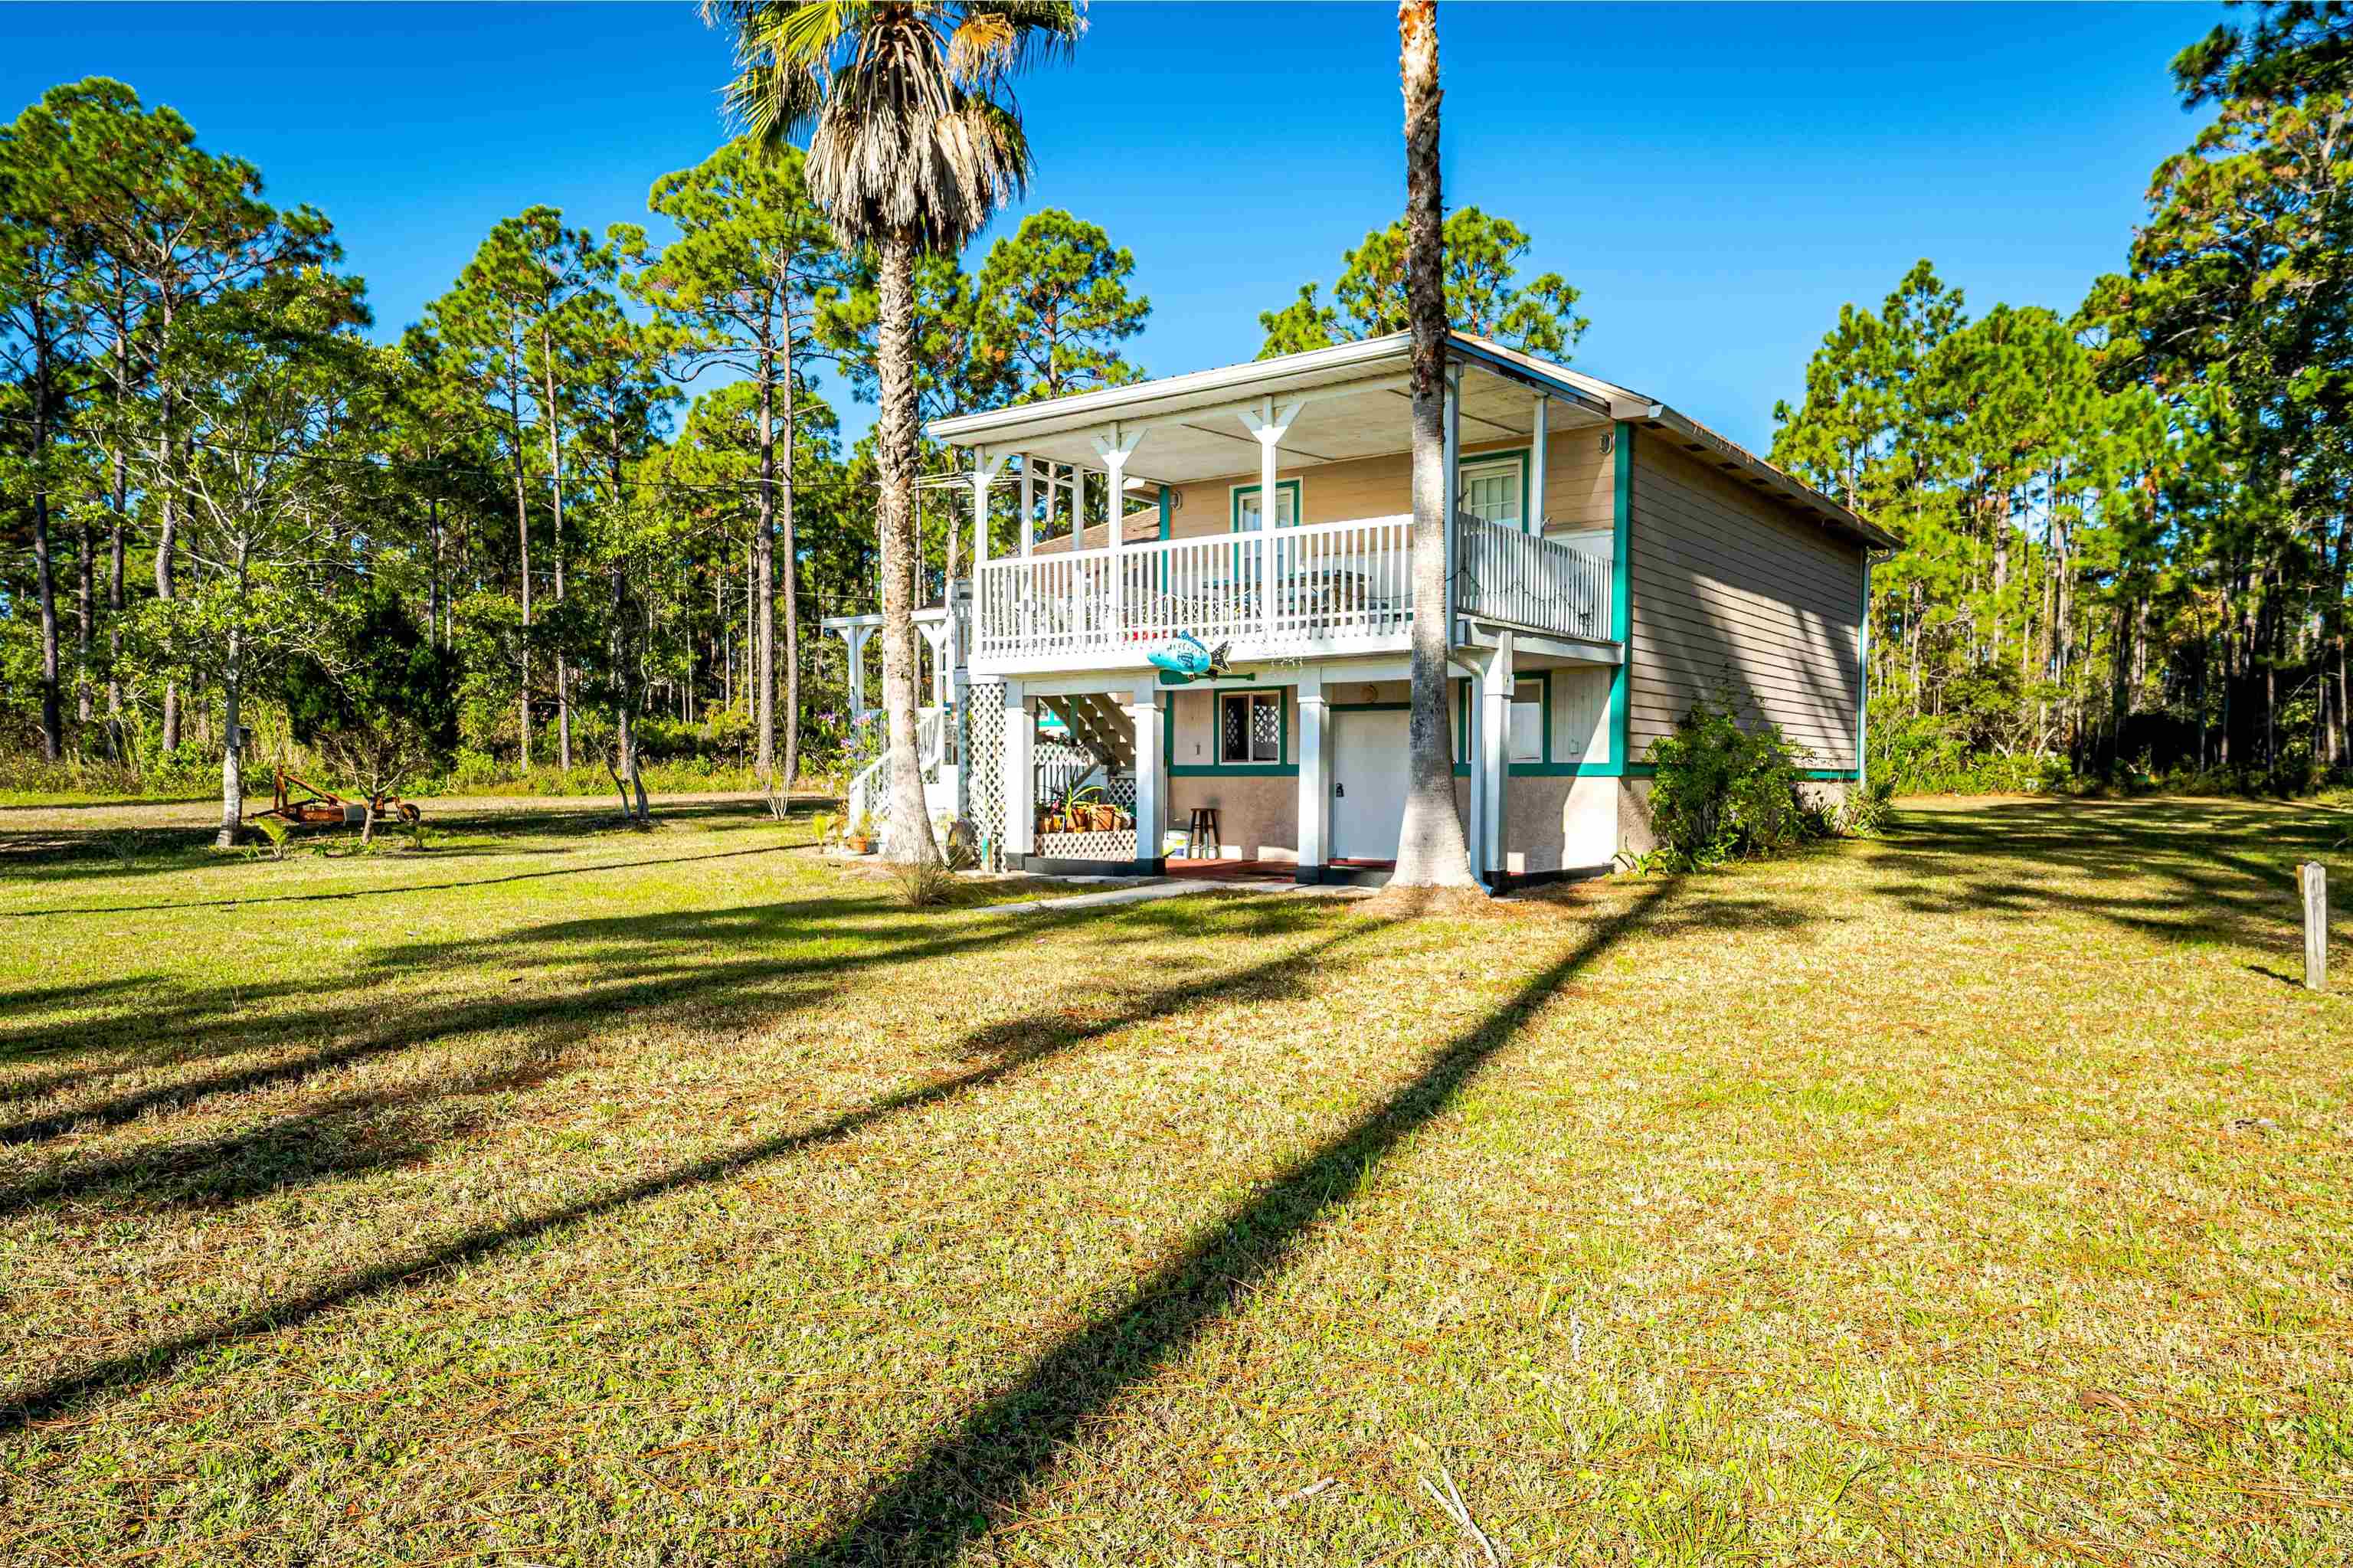 Check out this Old Florida beauty located on Highway 98 on the stretch of land between Carrabelle Beach and Eastpoint.  This 3 bedroom, 2 bath cottage is on 1 acre of land with a million dollar view & its very own private piece of beach.  This split floorplan cottage is spacious and would make anyone a fine family home or vacation destination! Located minutes from the picturesque coastal community of Carrabelle, you could own your very own spot on the Florida Panhandle's gateway to the Gulf of Mexico!